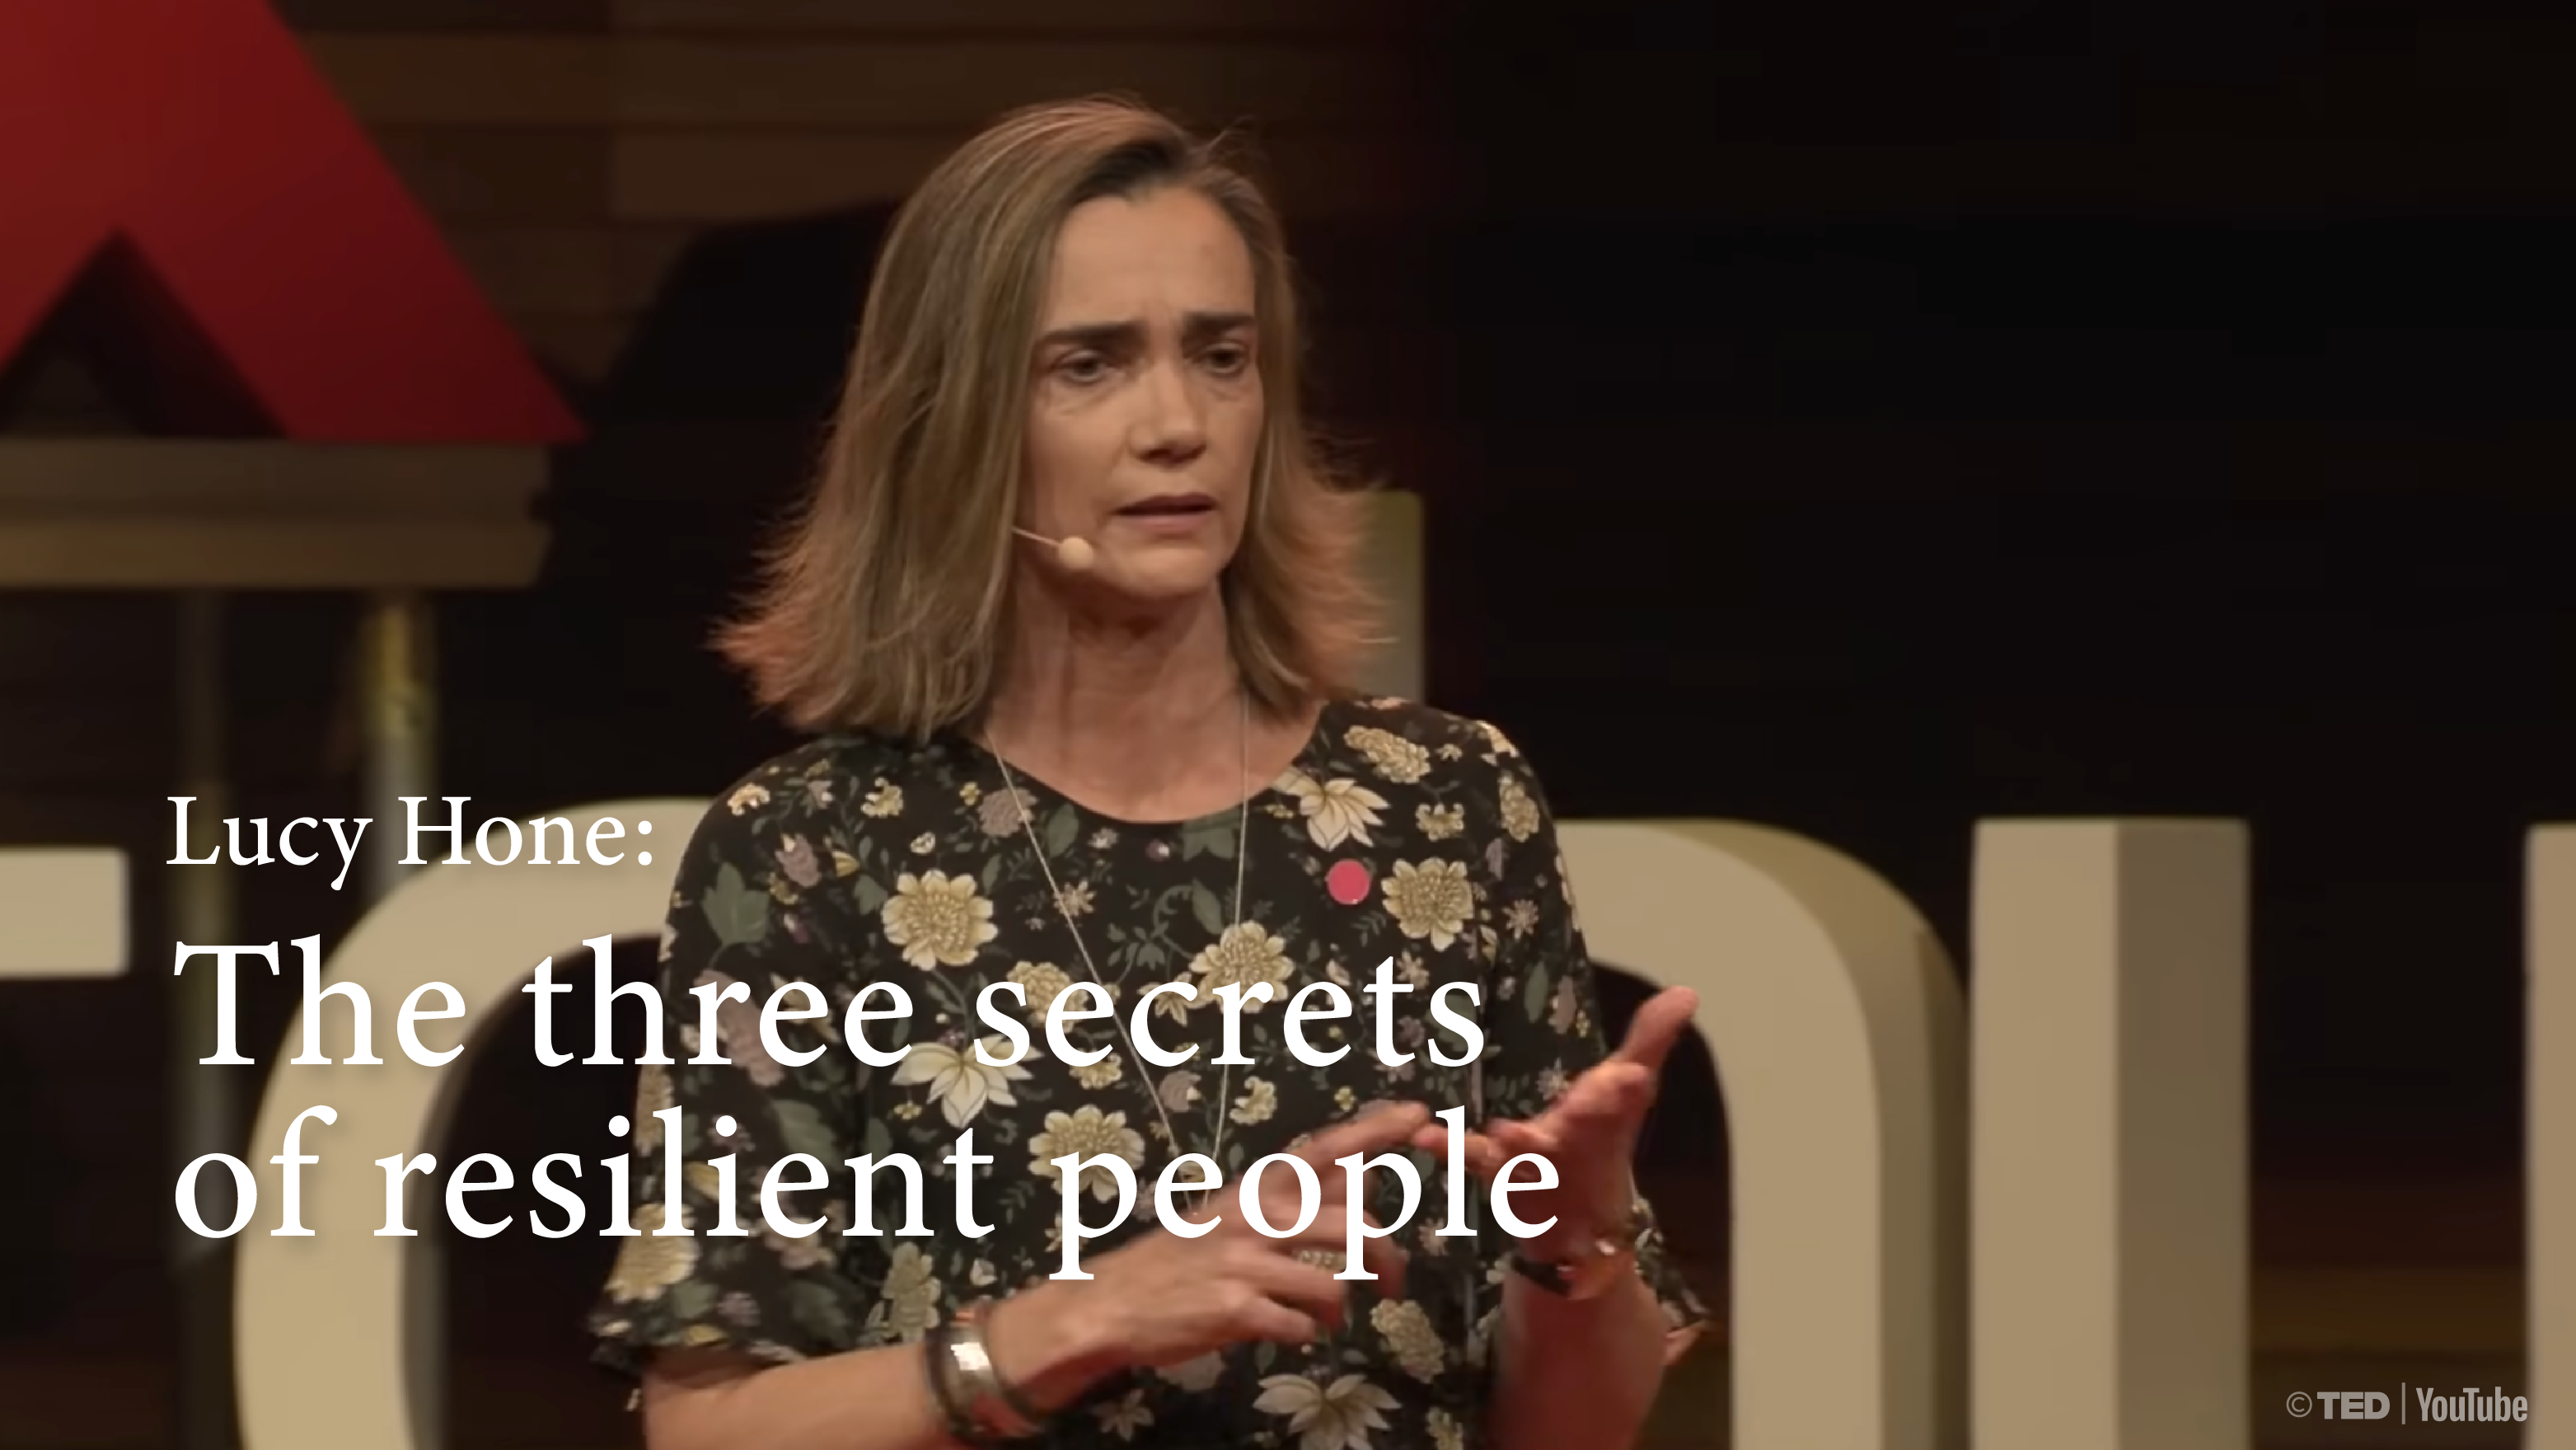 [B] The three secrets of resilient people | Lucy Hone [PRACTICE]